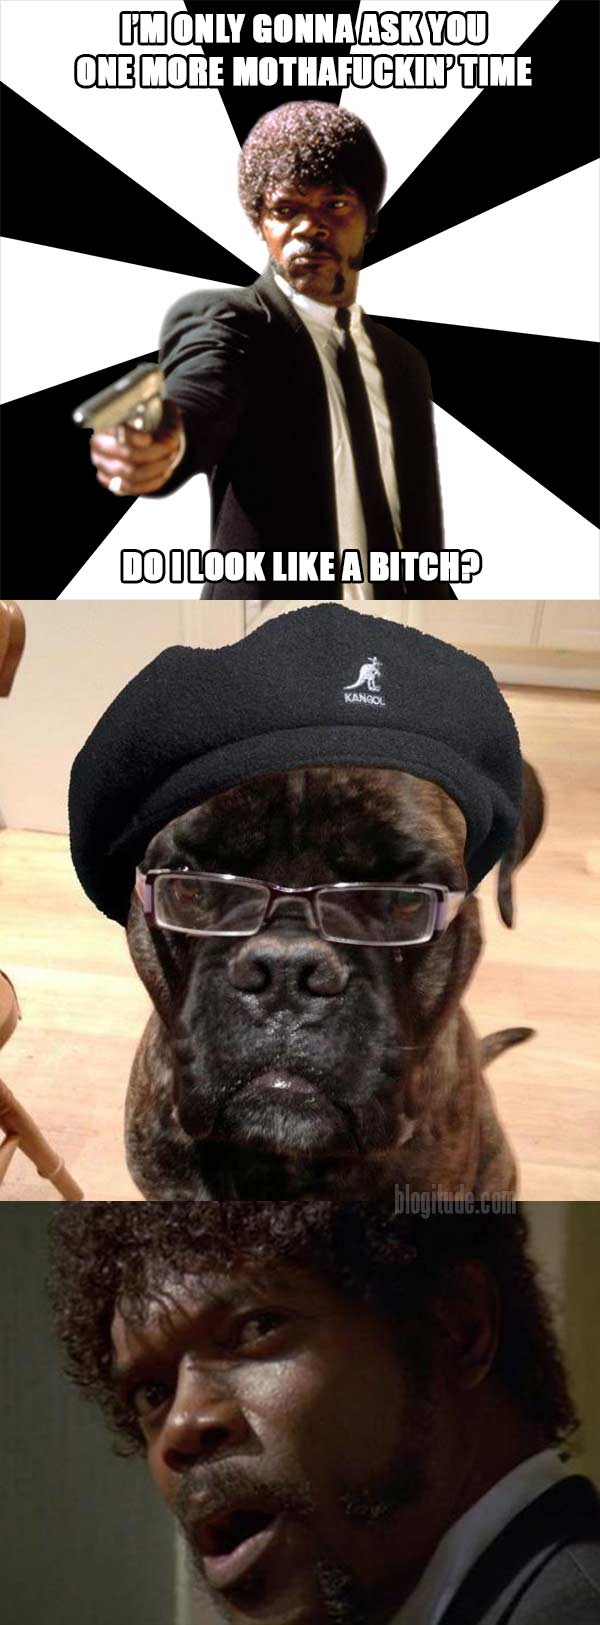 I'm only gonna ask you this one more mothafuckin' time... Do I look like a bitch?  (Samuel L. Dogson)  (WTF?!)